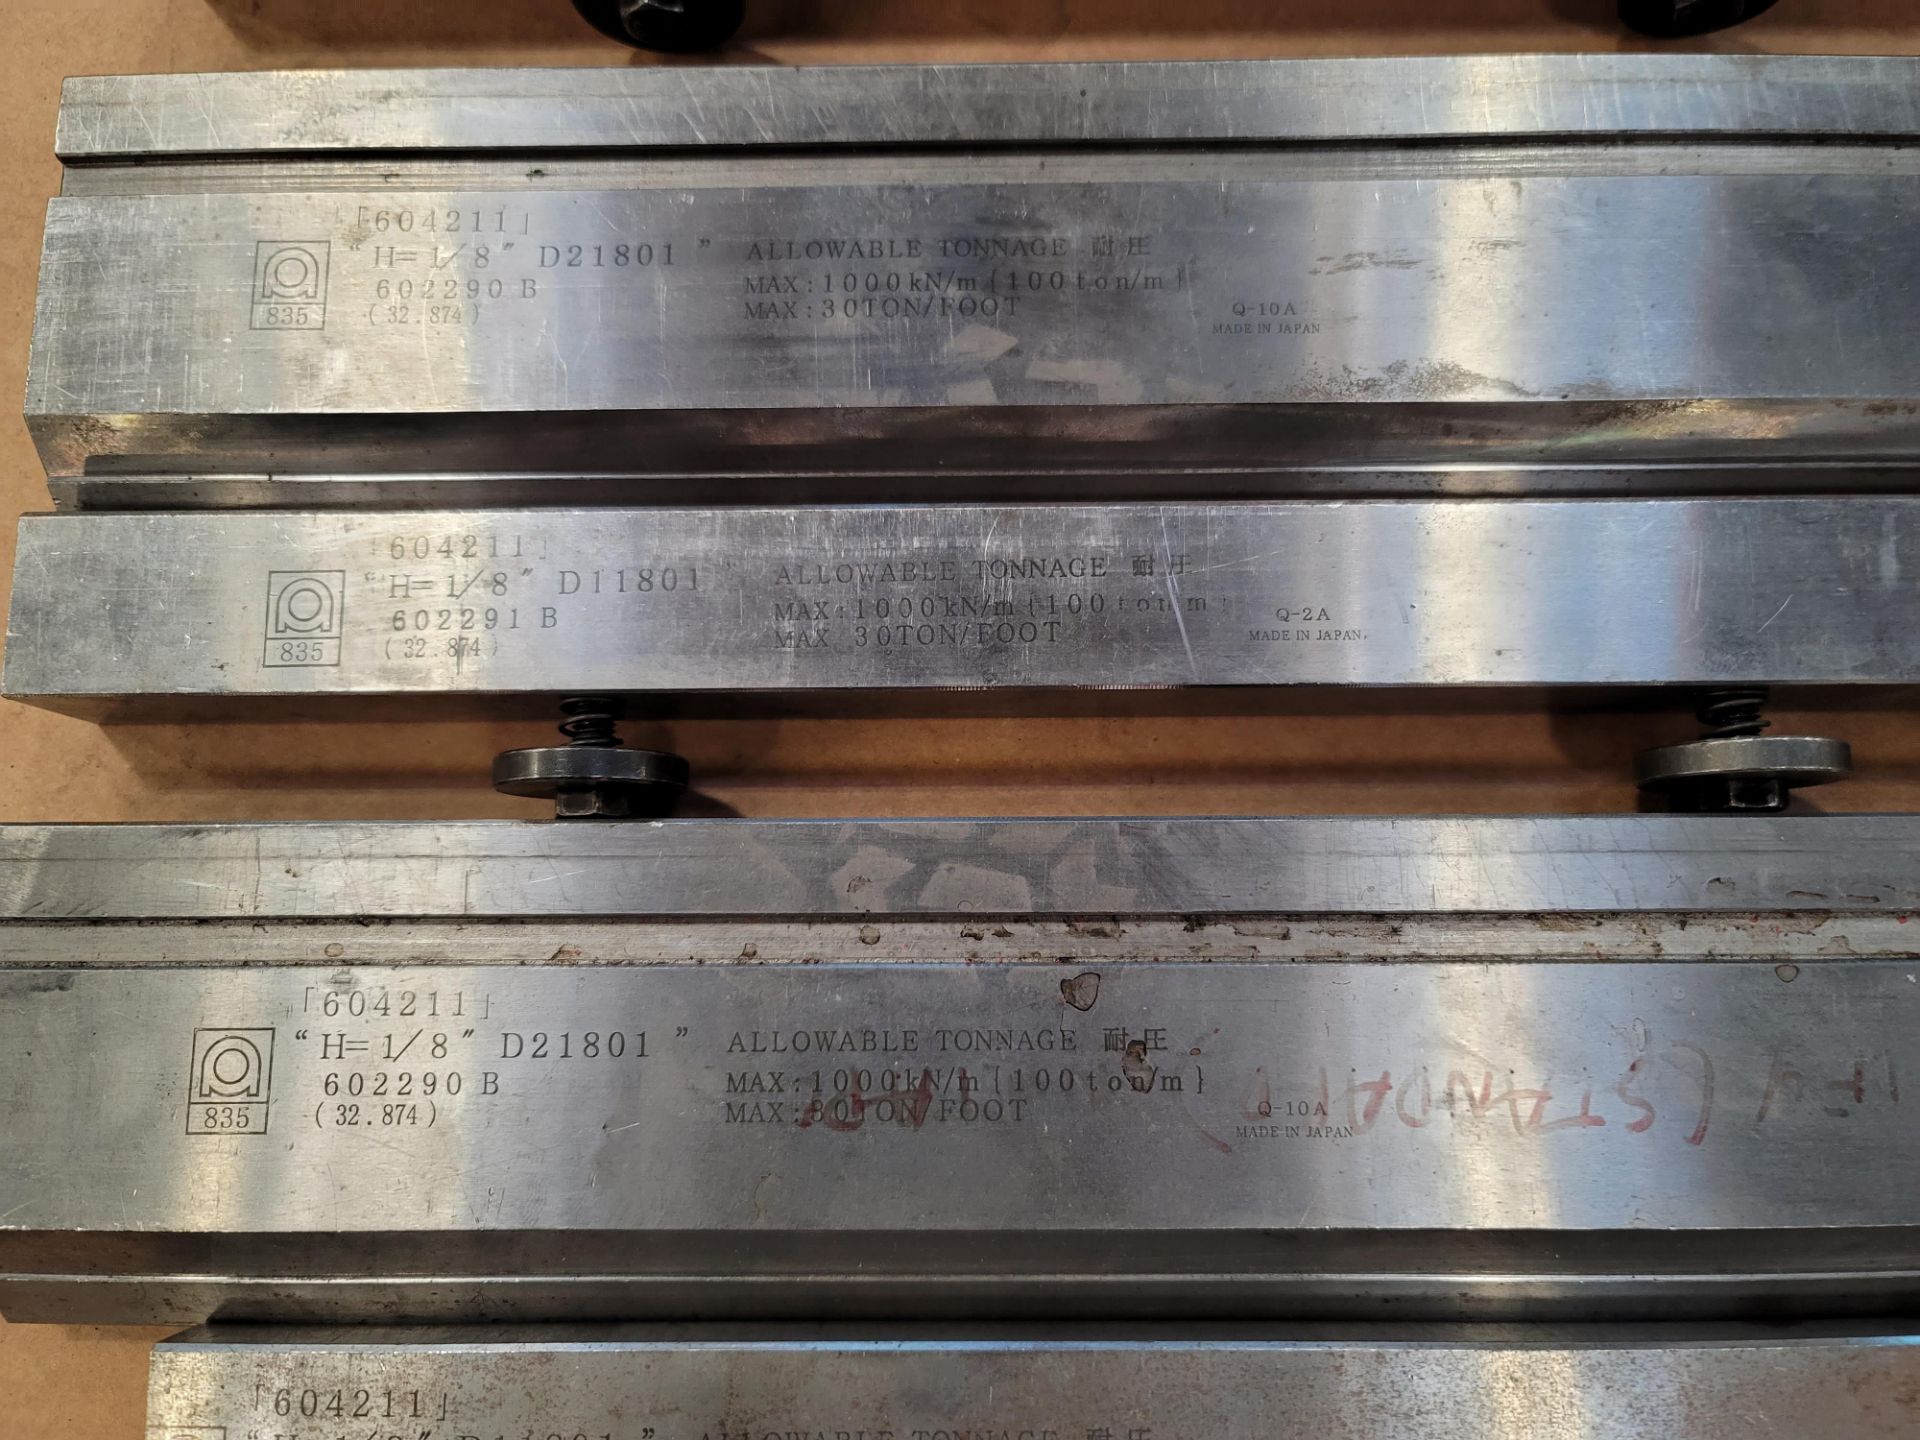 LOT - (2) SETS AMADA UPPER & LOWER DIES (SEE PHOTOS FOR SPECS)